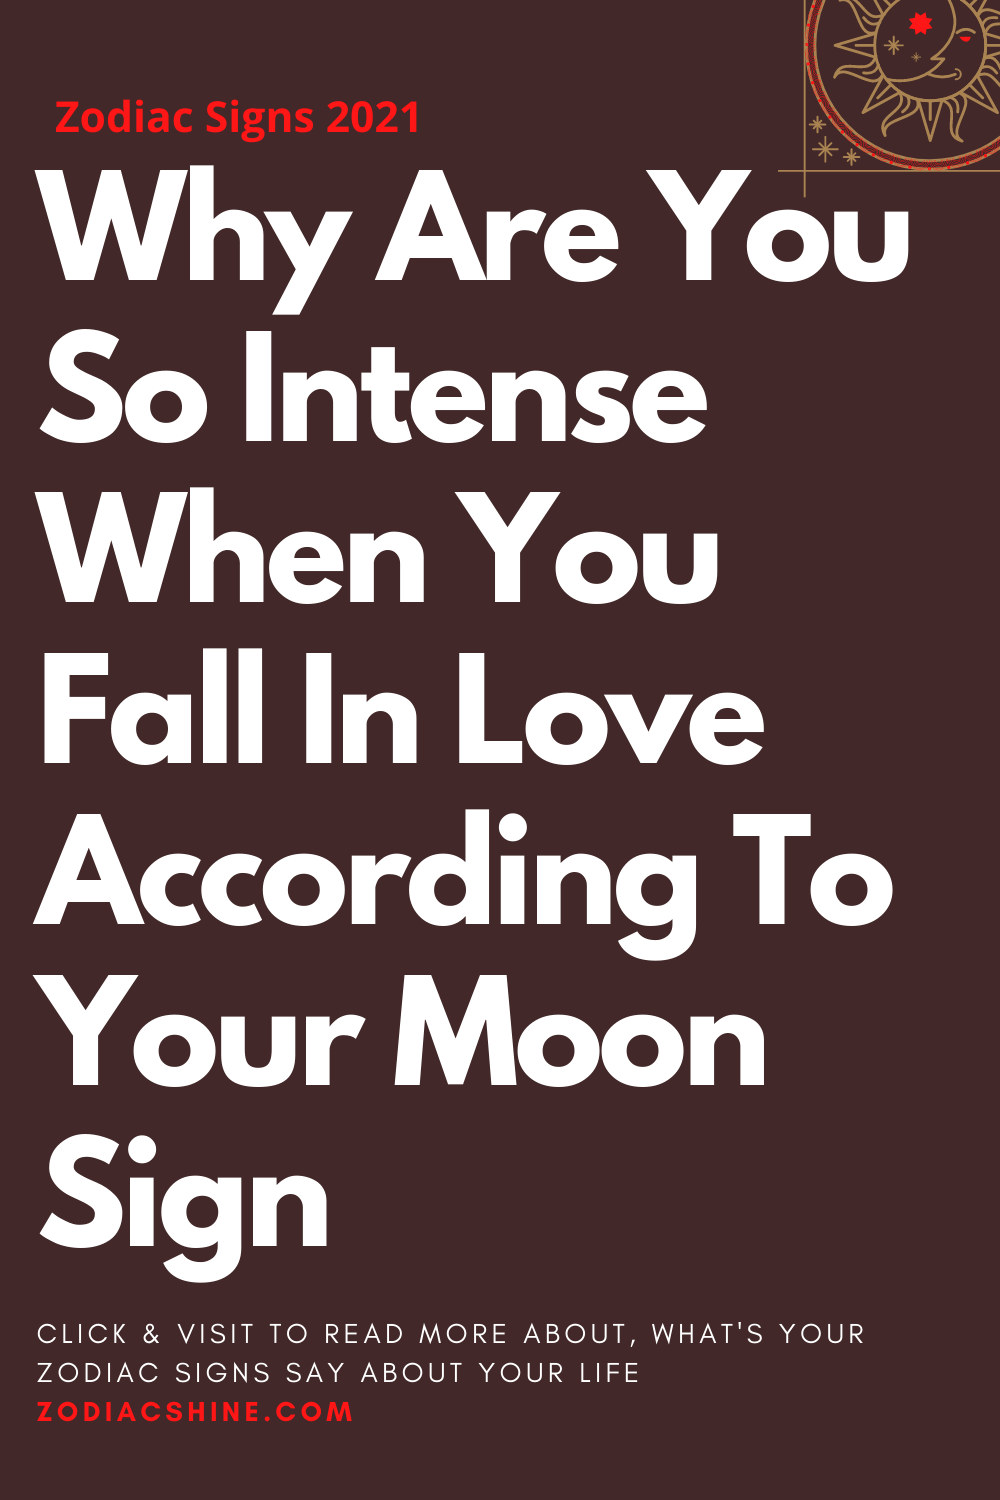 Why Are You So Intense When You Fall In Love According To Your Moon Sign